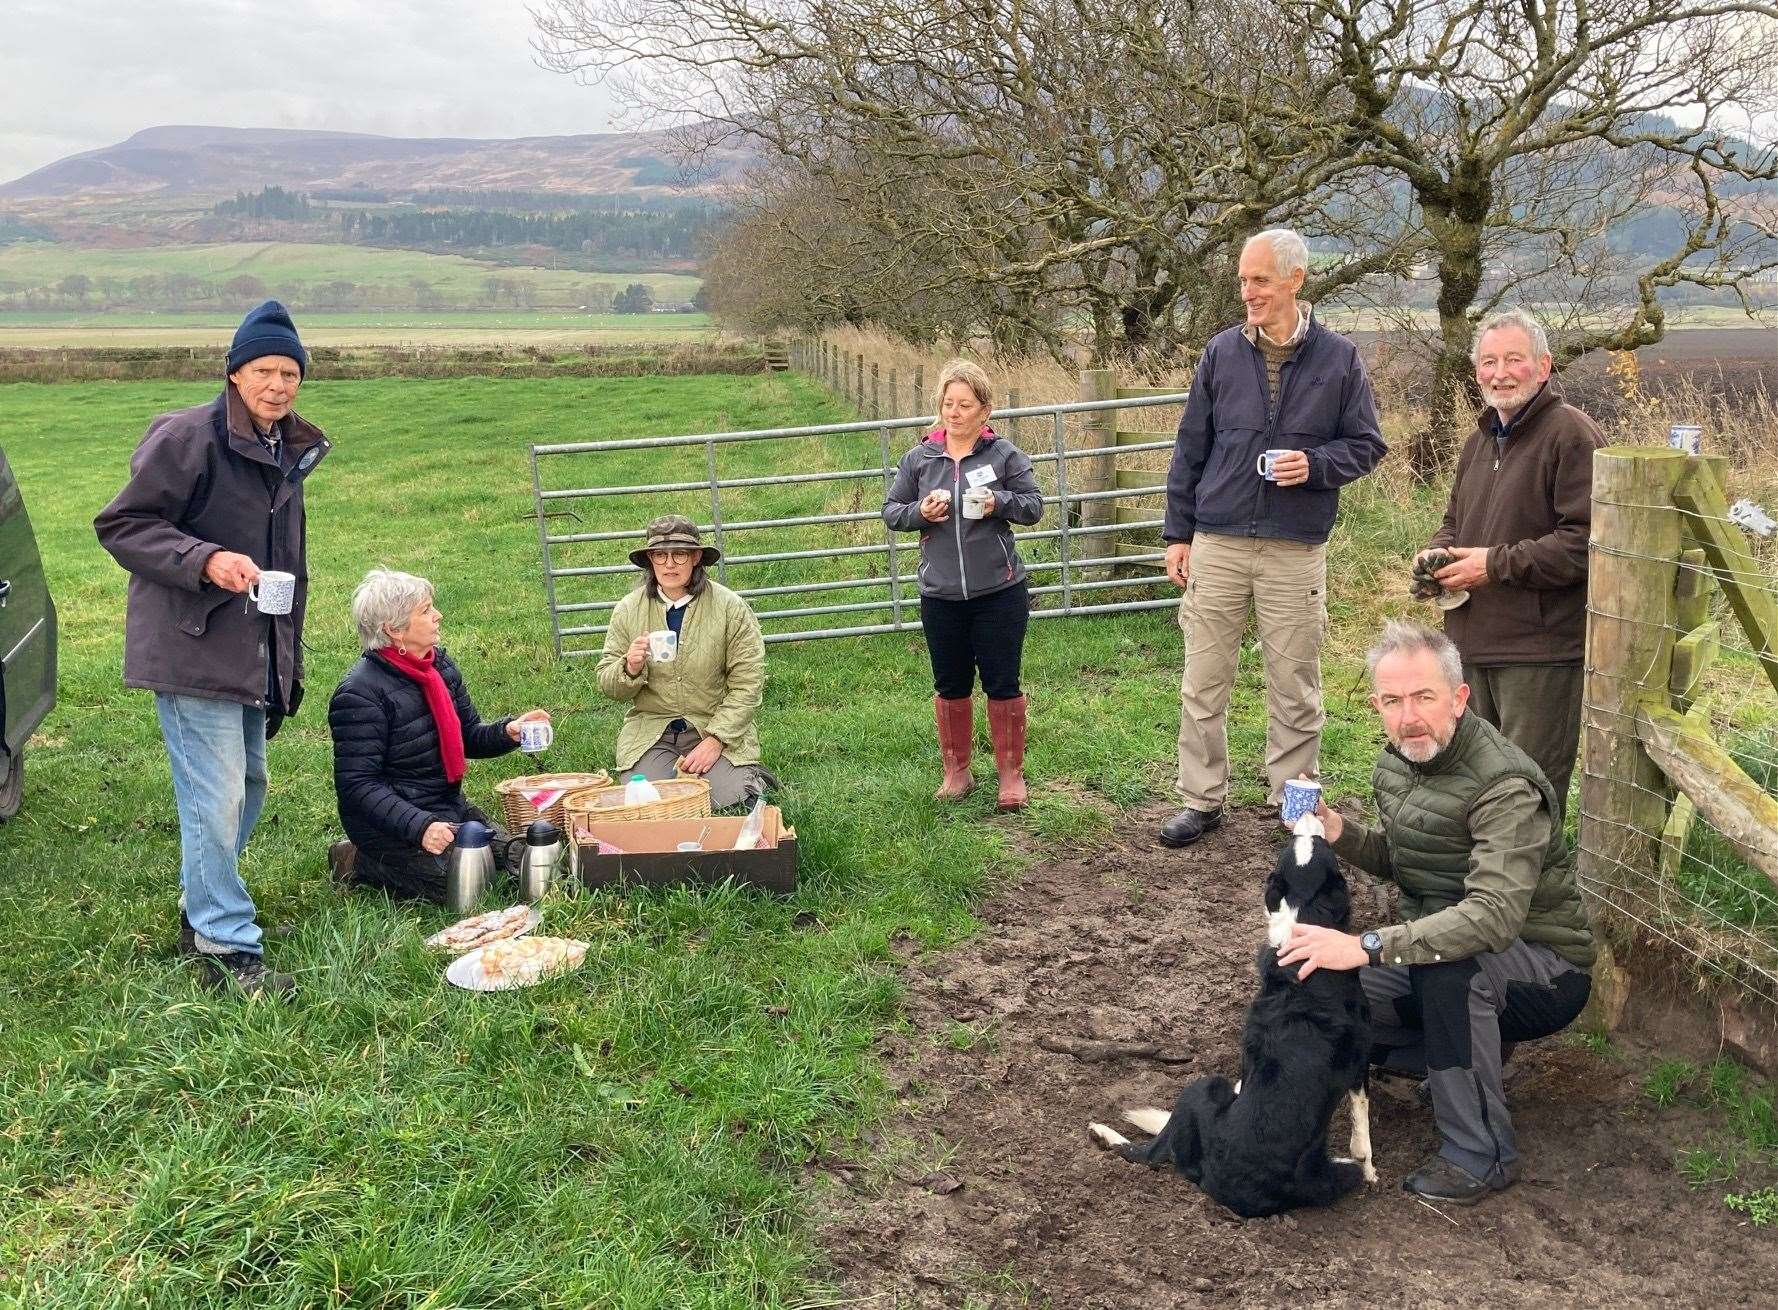 A welcome tea break for members of the project team and volunteers who helped prepare the ground for the tree planting.